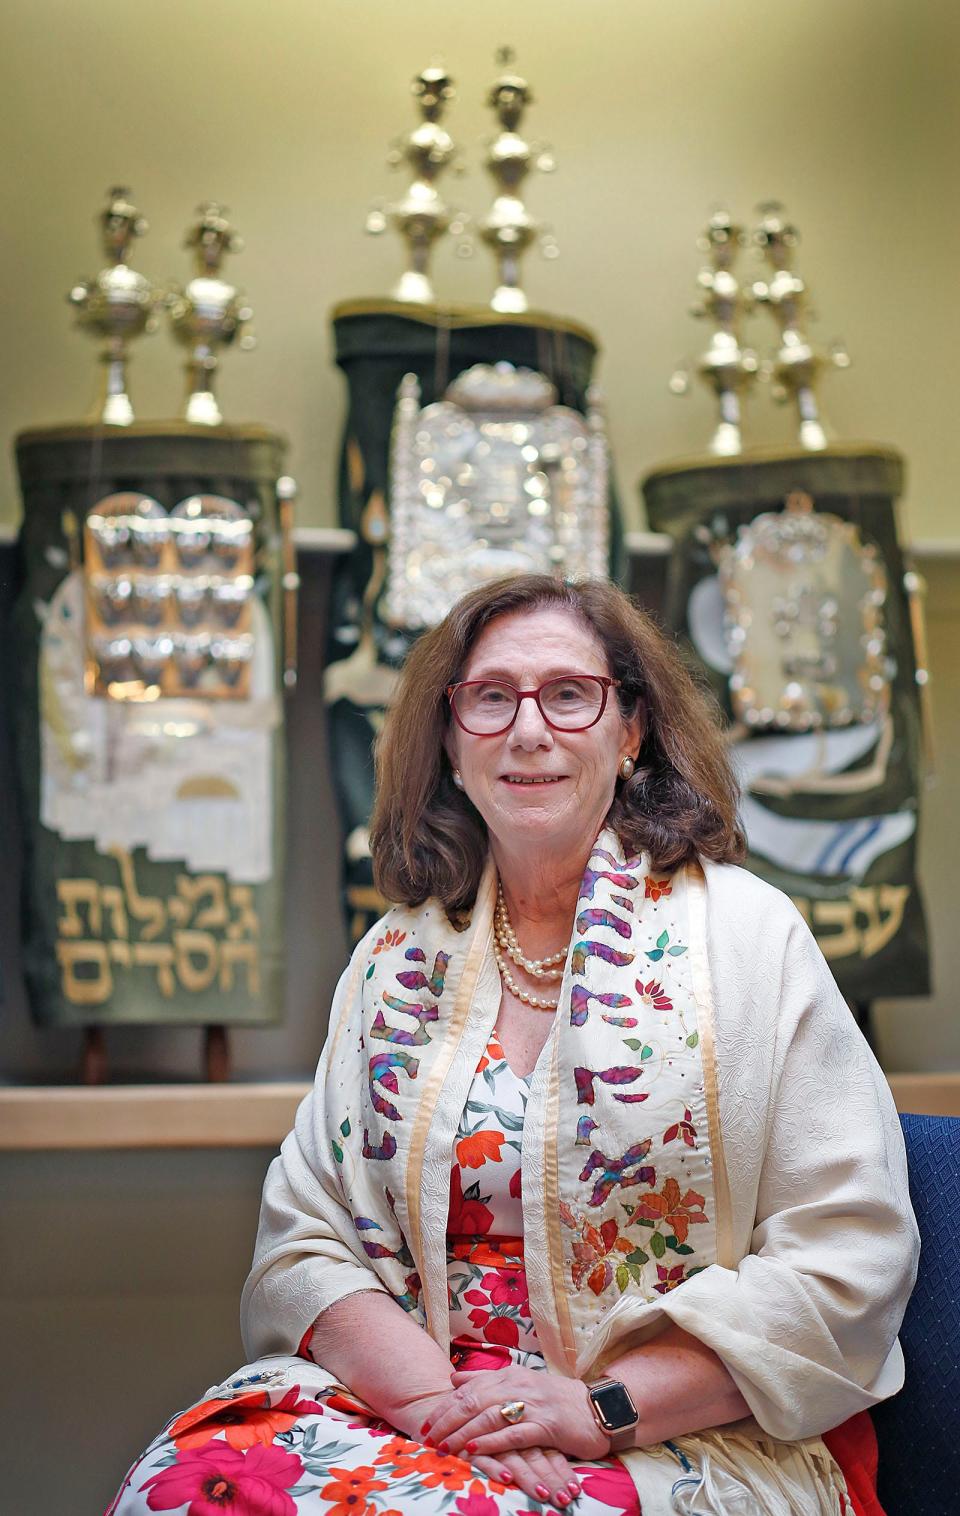 Rabbi Shira Joseph is retiring from leading Congregation Sha'aray Shalom in Hingham after 19 years.